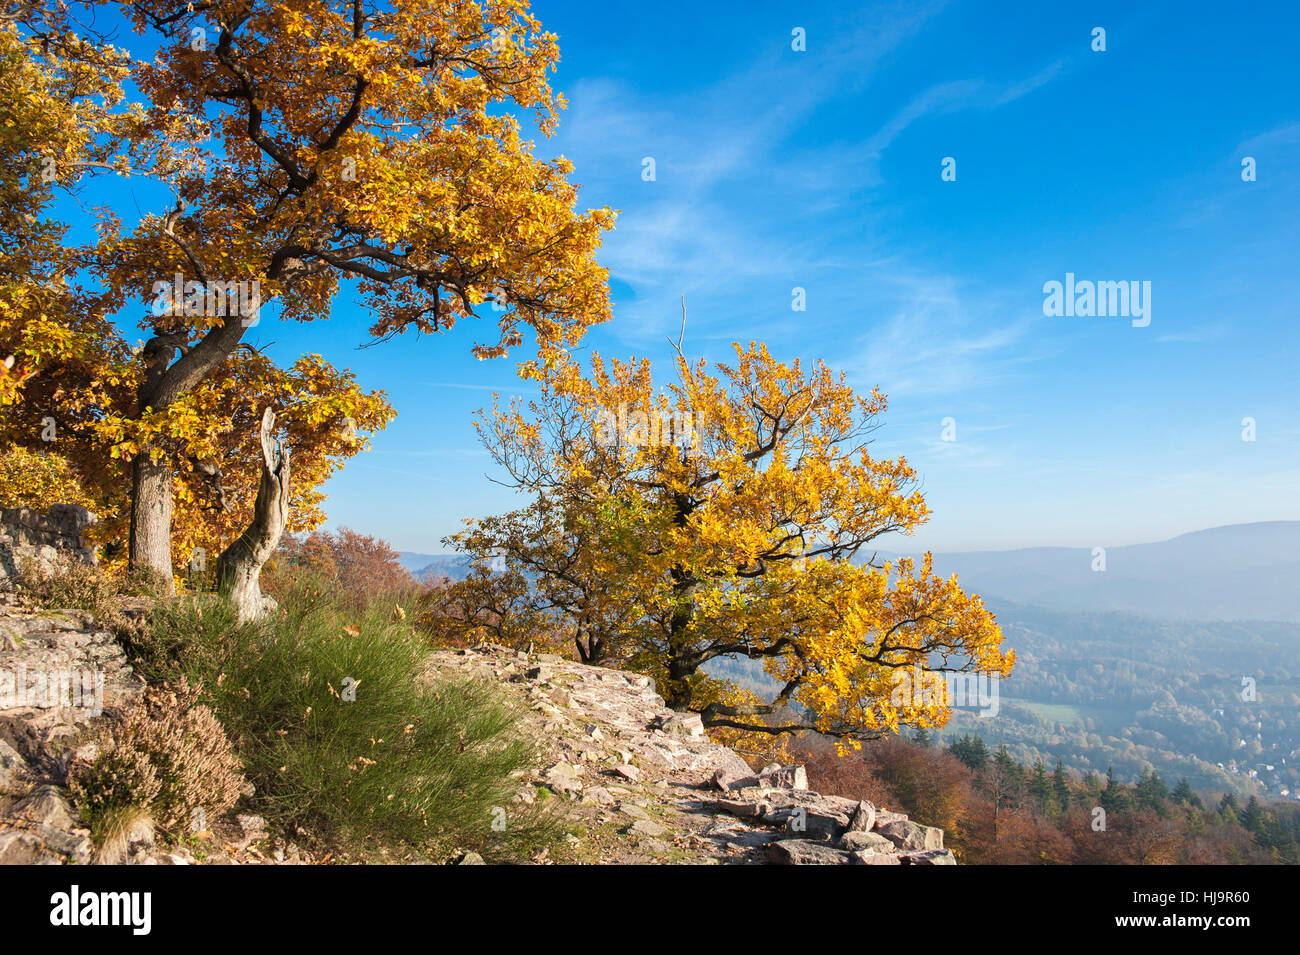 europe, autumnal, rock, woods, forested, black forest, autumn foliage, rocky, Stock Photo